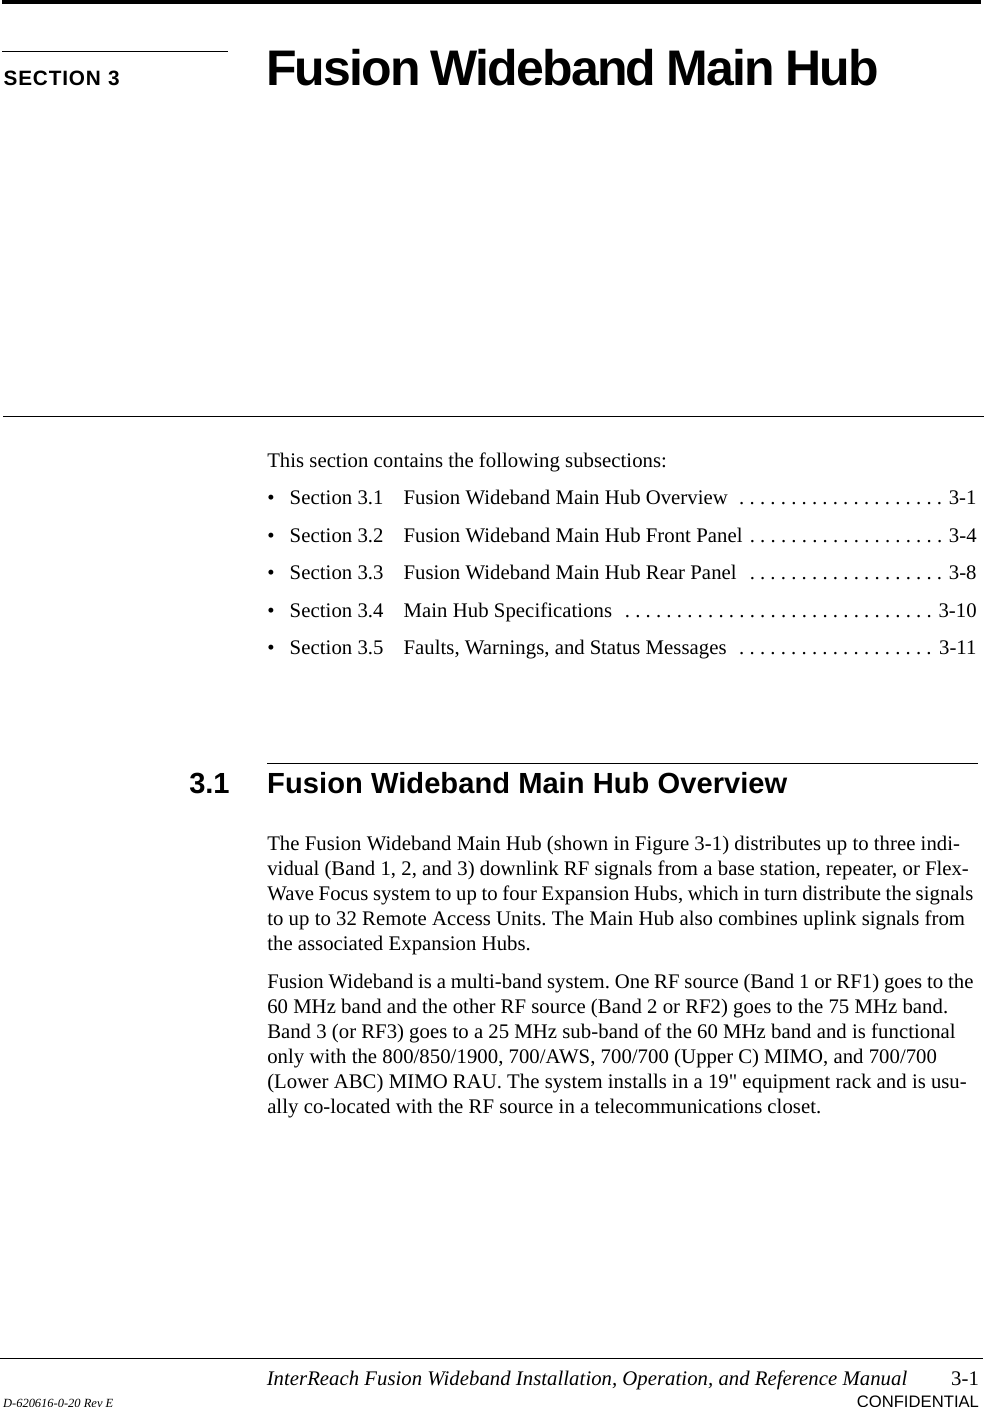 InterReach Fusion Wideband Installation, Operation, and Reference Manual 3-1D-620616-0-20 Rev E CONFIDENTIALSECTION 3 Fusion Wideband Main HubThis section contains the following subsections:• Section 3.1   Fusion Wideband Main Hub Overview  . . . . . . . . . . . . . . . . . . . . 3-1• Section 3.2   Fusion Wideband Main Hub Front Panel . . . . . . . . . . . . . . . . . . . 3-4• Section 3.3   Fusion Wideband Main Hub Rear Panel  . . . . . . . . . . . . . . . . . . . 3-8• Section 3.4   Main Hub Specifications  . . . . . . . . . . . . . . . . . . . . . . . . . . . . . . 3-10• Section 3.5   Faults, Warnings, and Status Messages  . . . . . . . . . . . . . . . . . . . 3-113.1 Fusion Wideband Main Hub OverviewThe Fusion Wideband Main Hub (shown in Figure 3-1) distributes up to three indi-vidual (Band 1, 2, and 3) downlink RF signals from a base station, repeater, or Flex-Wave Focus system to up to four Expansion Hubs, which in turn distribute the signals to up to 32 Remote Access Units. The Main Hub also combines uplink signals from the associated Expansion Hubs.Fusion Wideband is a multi-band system. One RF source (Band 1 or RF1) goes to the 60 MHz band and the other RF source (Band 2 or RF2) goes to the 75 MHz band. Band 3 (or RF3) goes to a 25 MHz sub-band of the 60 MHz band and is functional only with the 800/850/1900, 700/AWS, 700/700 (Upper C) MIMO, and 700/700 (Lower ABC) MIMO RAU. The system installs in a 19&quot; equipment rack and is usu-ally co-located with the RF source in a telecommunications closet.